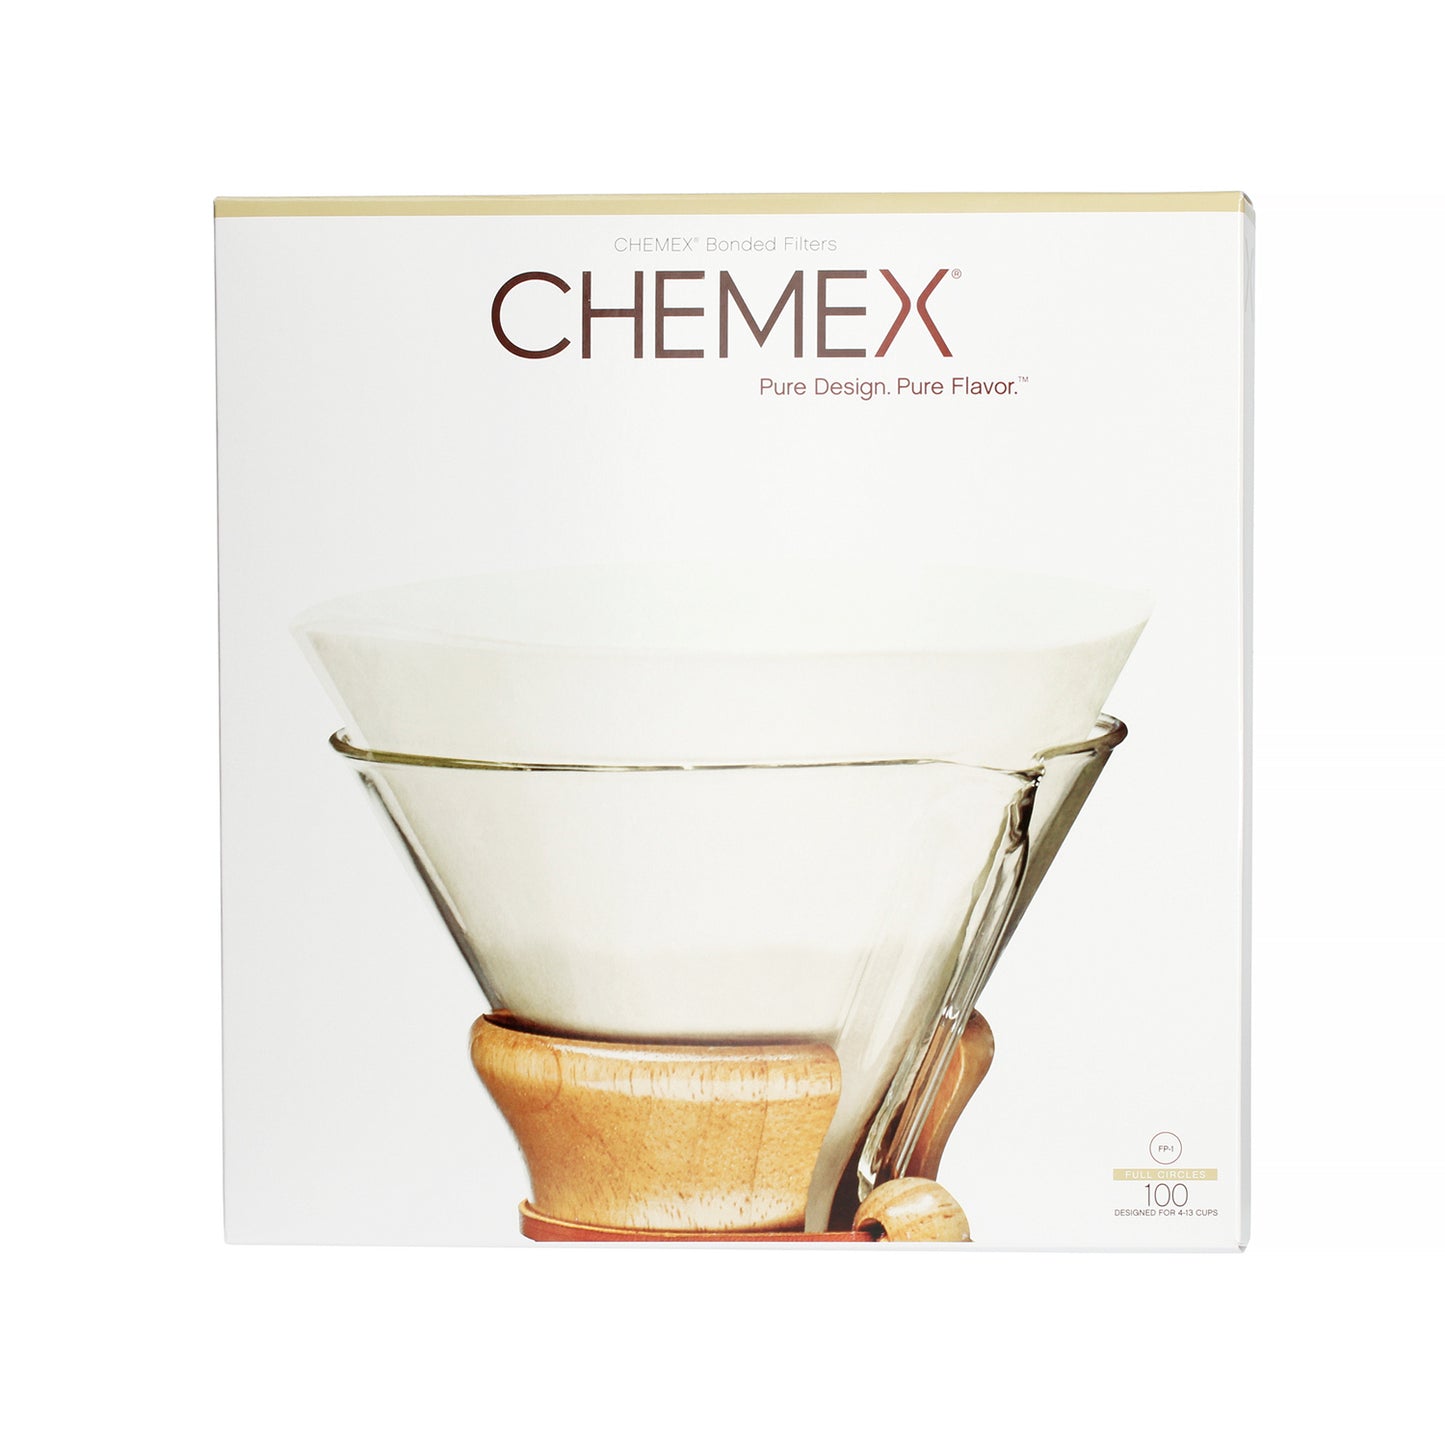 CHEMEX BONDED FILTERS UNFOLDED CIRCLE - White - 6, 8, 10 Cups